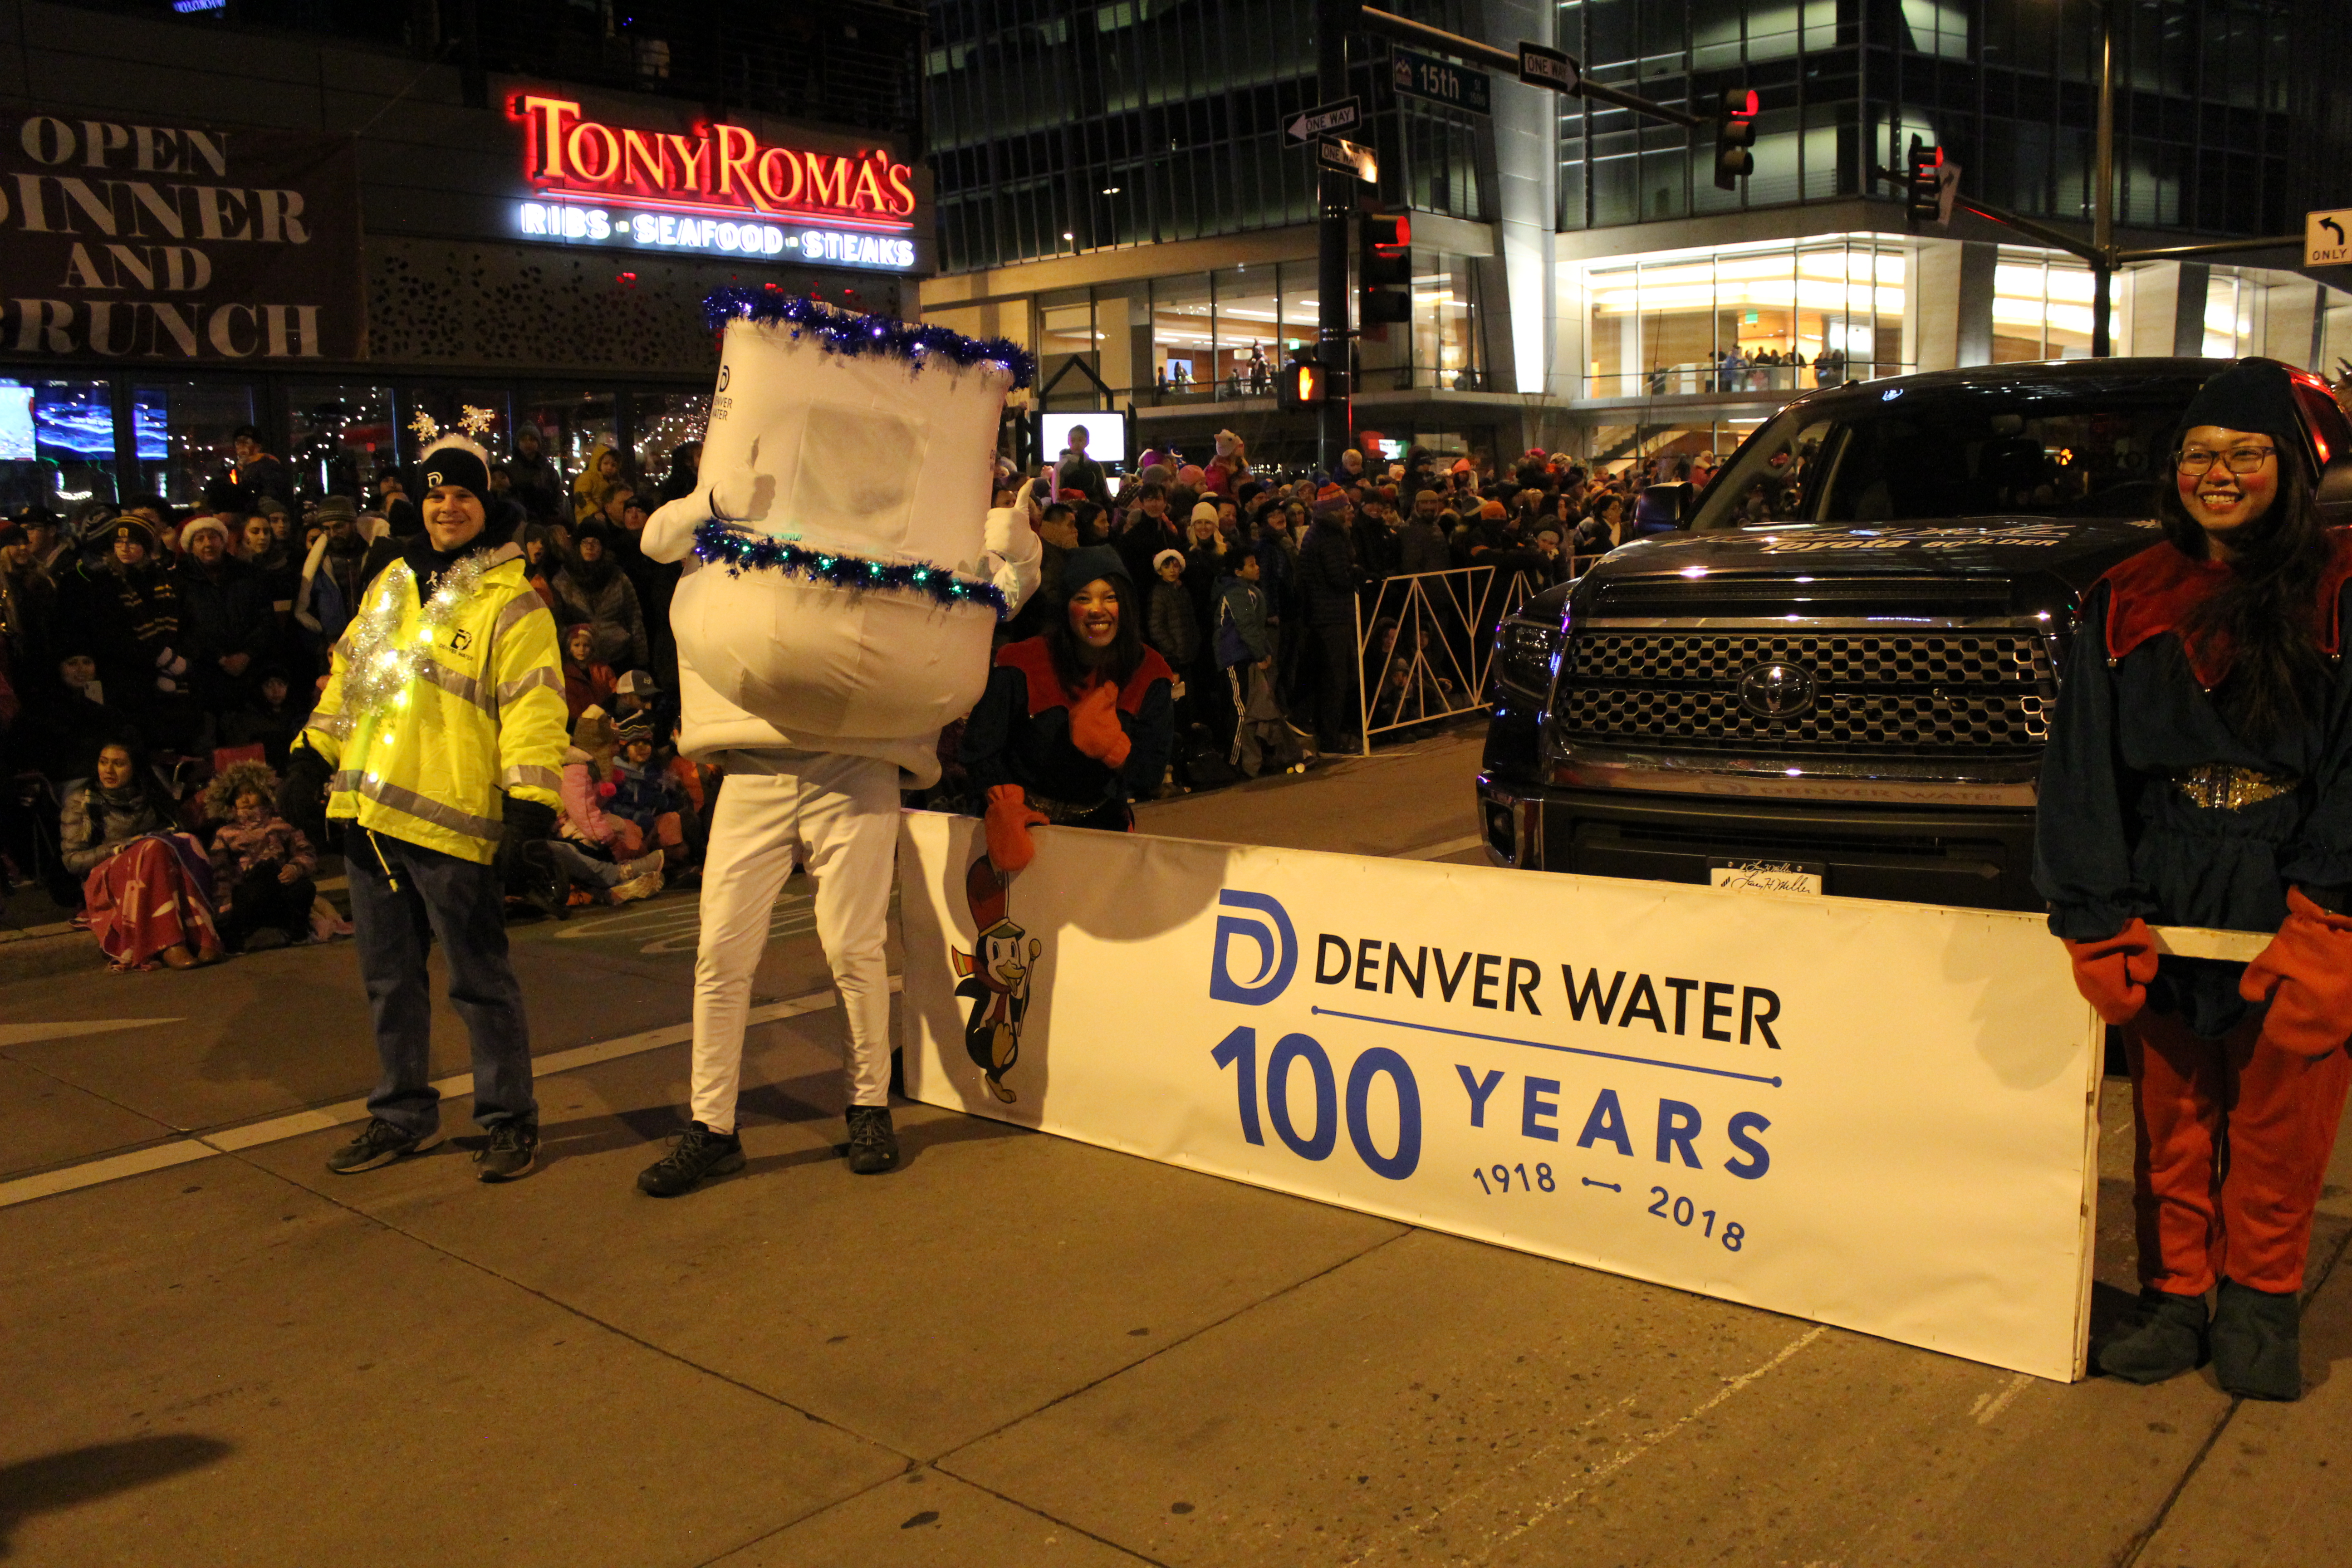 An image of a Denver Water volunteer in a yellow jacket, the running toilet giving a thumbs-up sign, and the Denver Water banner held by volunteers in elf costumes.